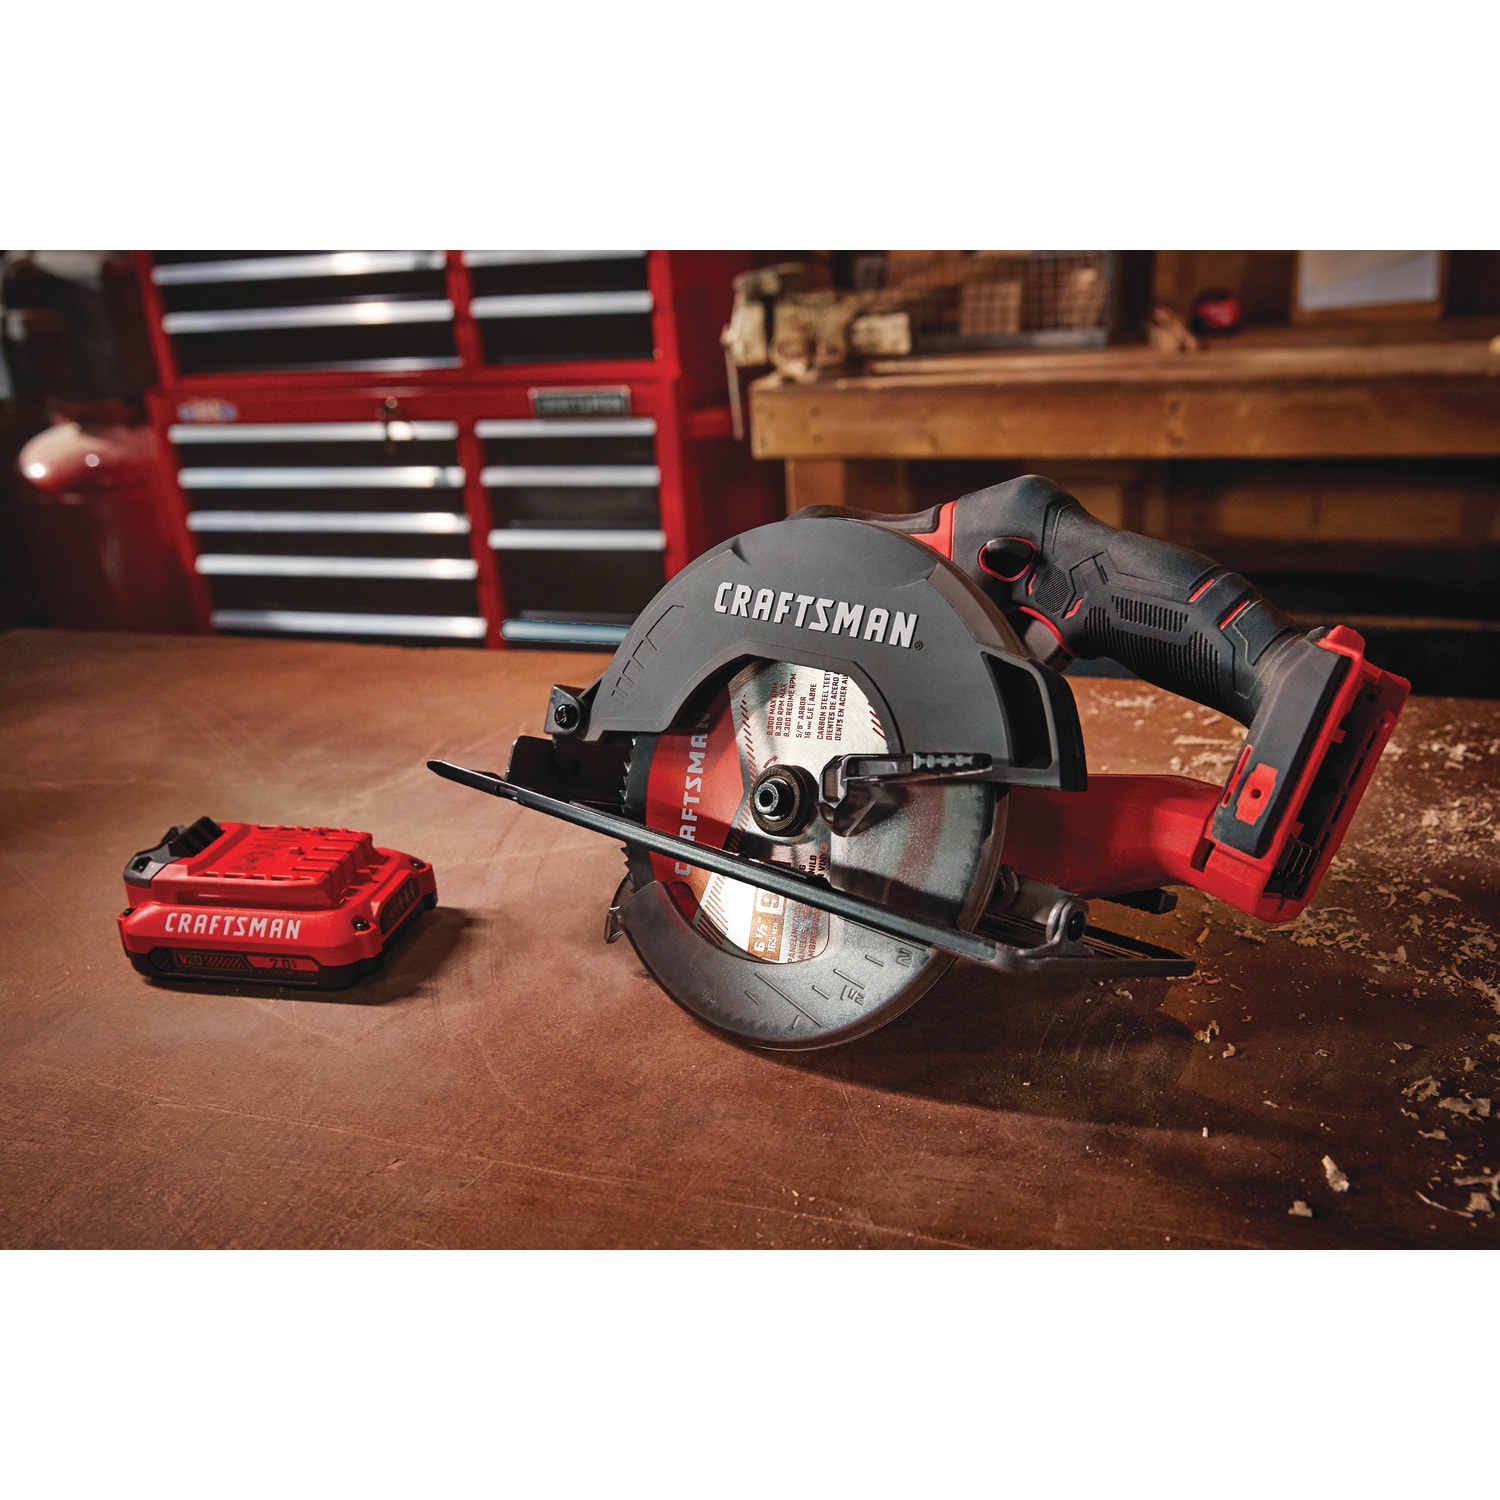 CRAFTSMAN V20 20-volt Max 6-1/2-in Cordless Circular Saw Kit (1-Battery  Charger  Included) at